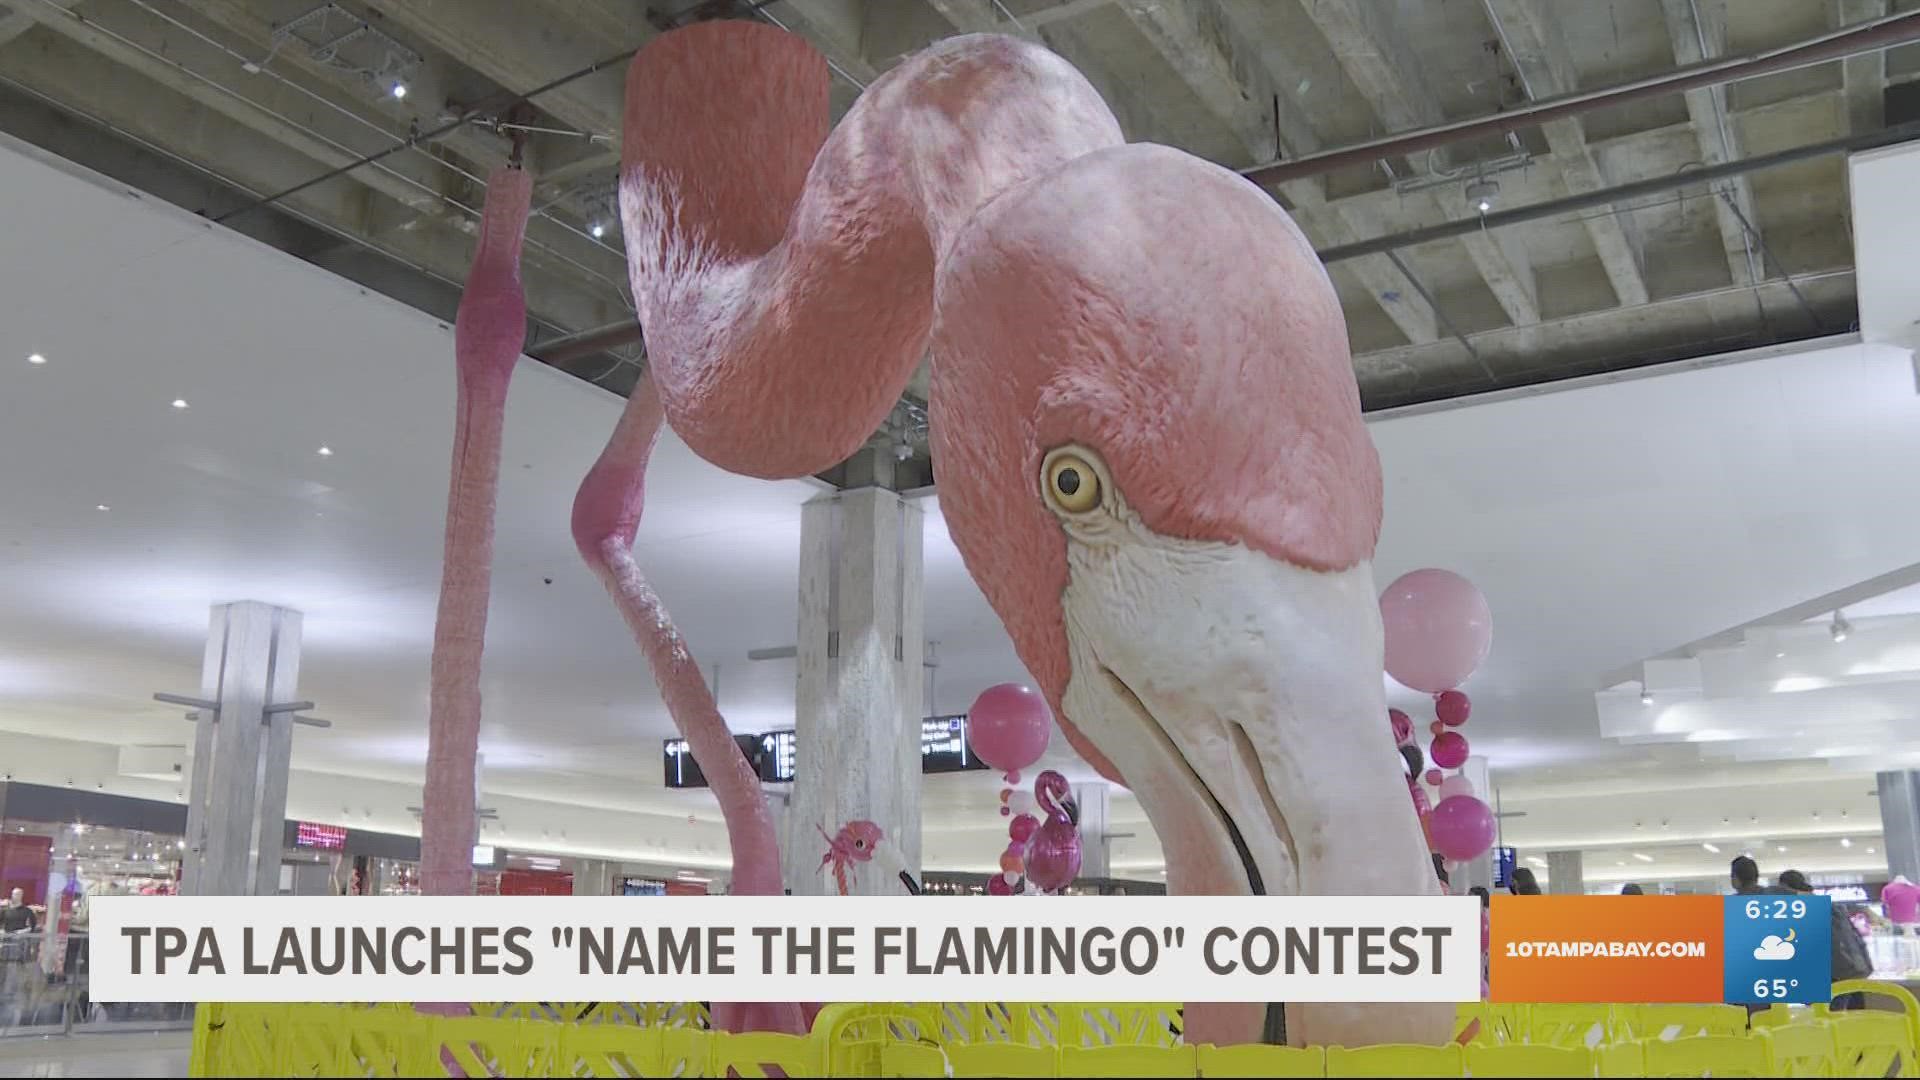 Are you good at naming things? The Tampa International Airport (TPA) needs your help coming up with a name for its giant pink flamingo sculpture.